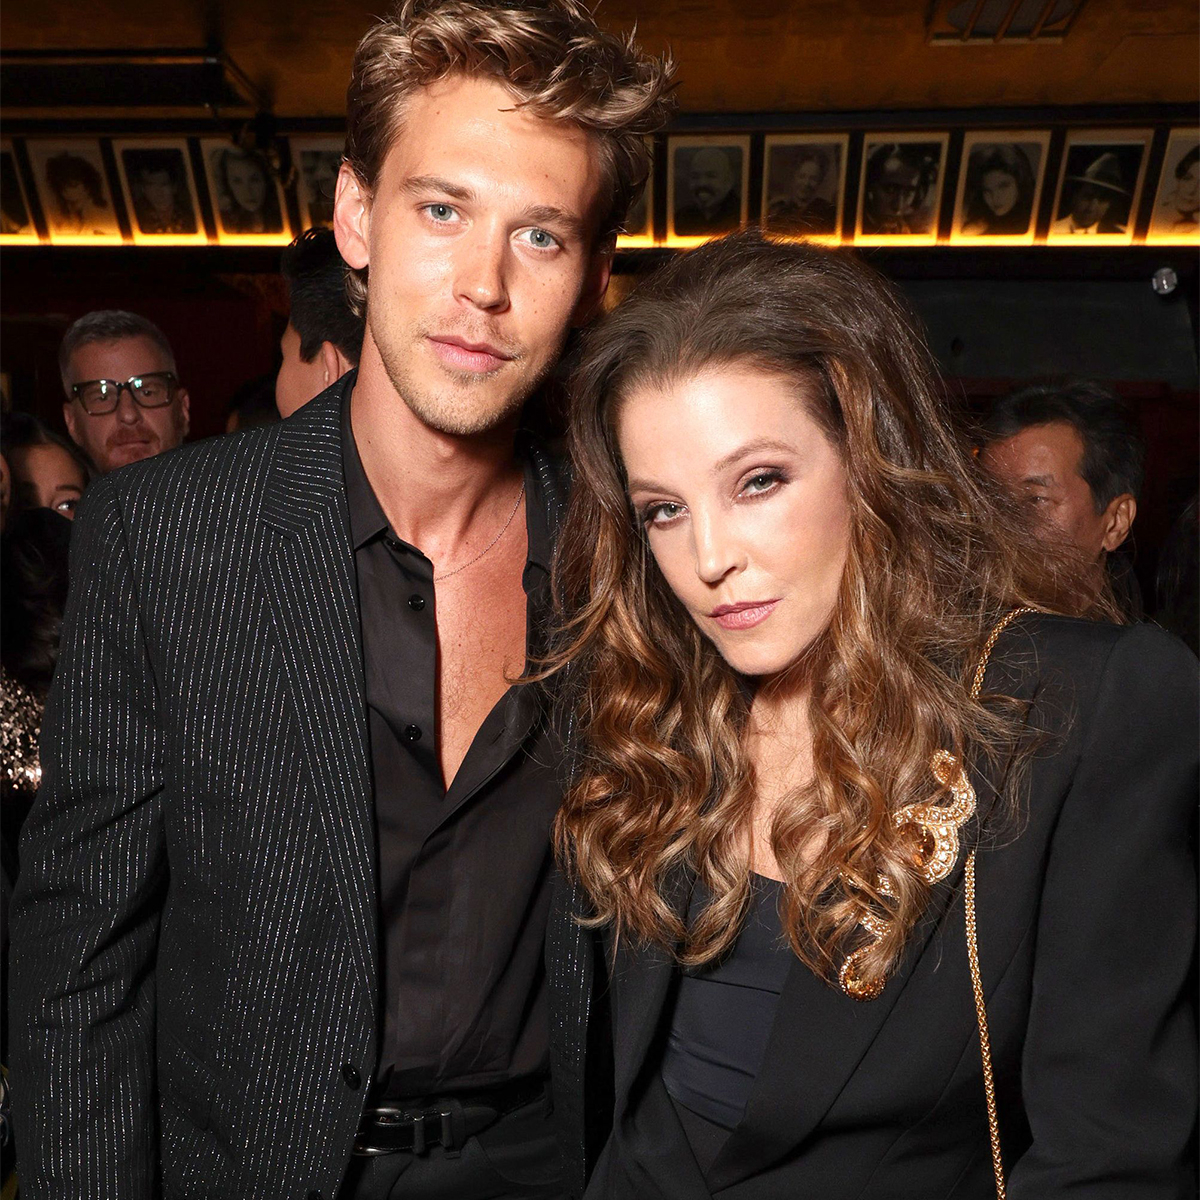 How Lisa Marie Presley Supported Austin Butler Before Her Death